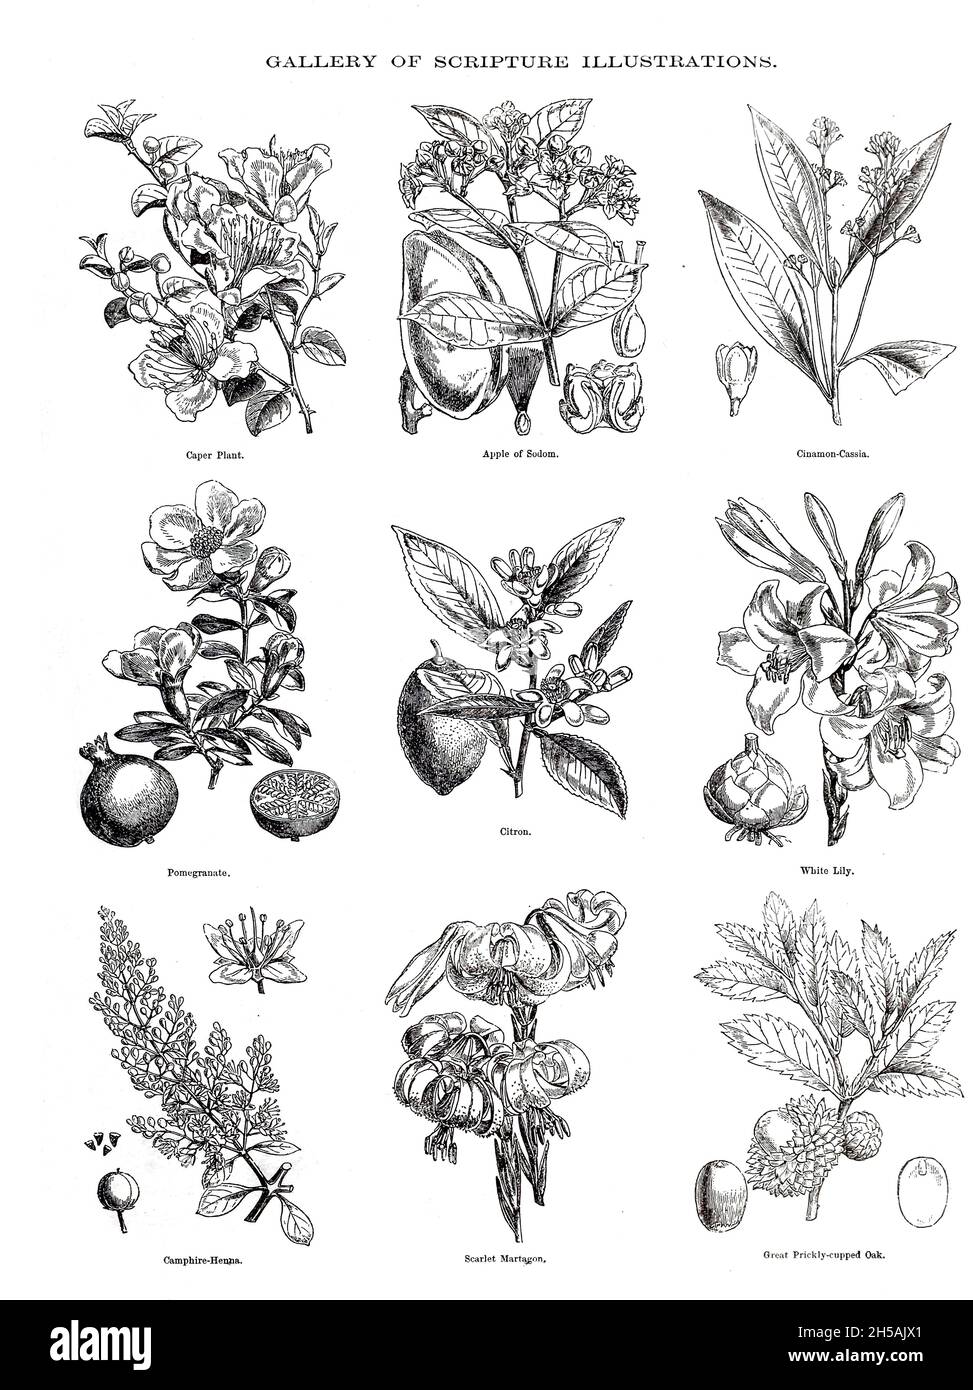 Plants of the Bible Gallery of Scripture Illustrations of plants and crops from ' The Doré family Bible ' containing the Old and New Testaments, The Apocrypha Embellished with Fine Full-Page Engravings, Illustrations and the Dore Bible Gallery. Published in Philadelphia by William T. Amies in 1883 Stock Photo